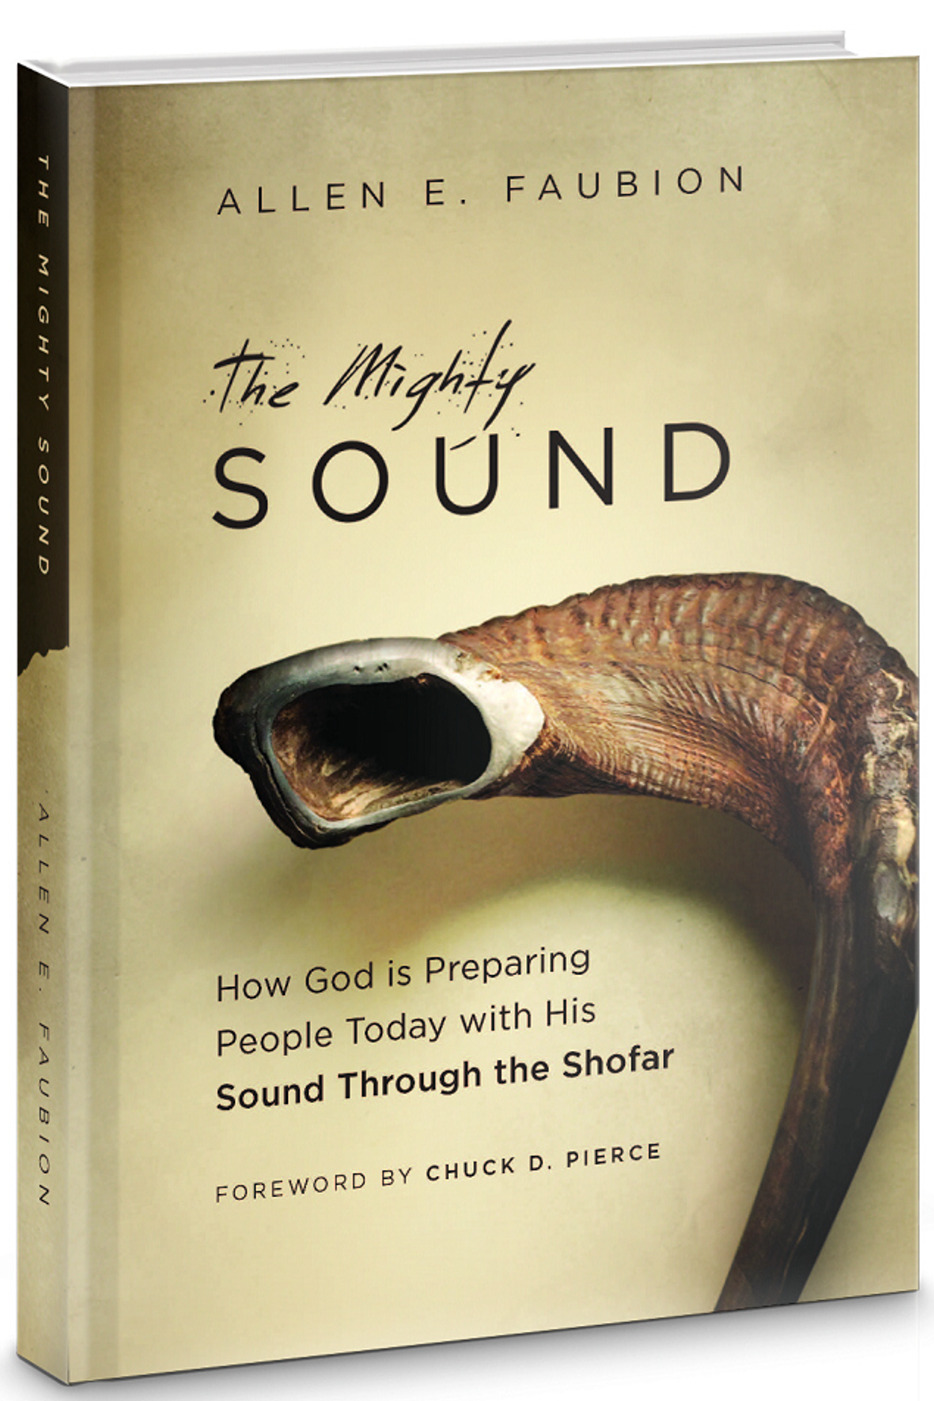 The Mighty Sound(英)：How God is Preparing People Today with His Sound Through the Shofar